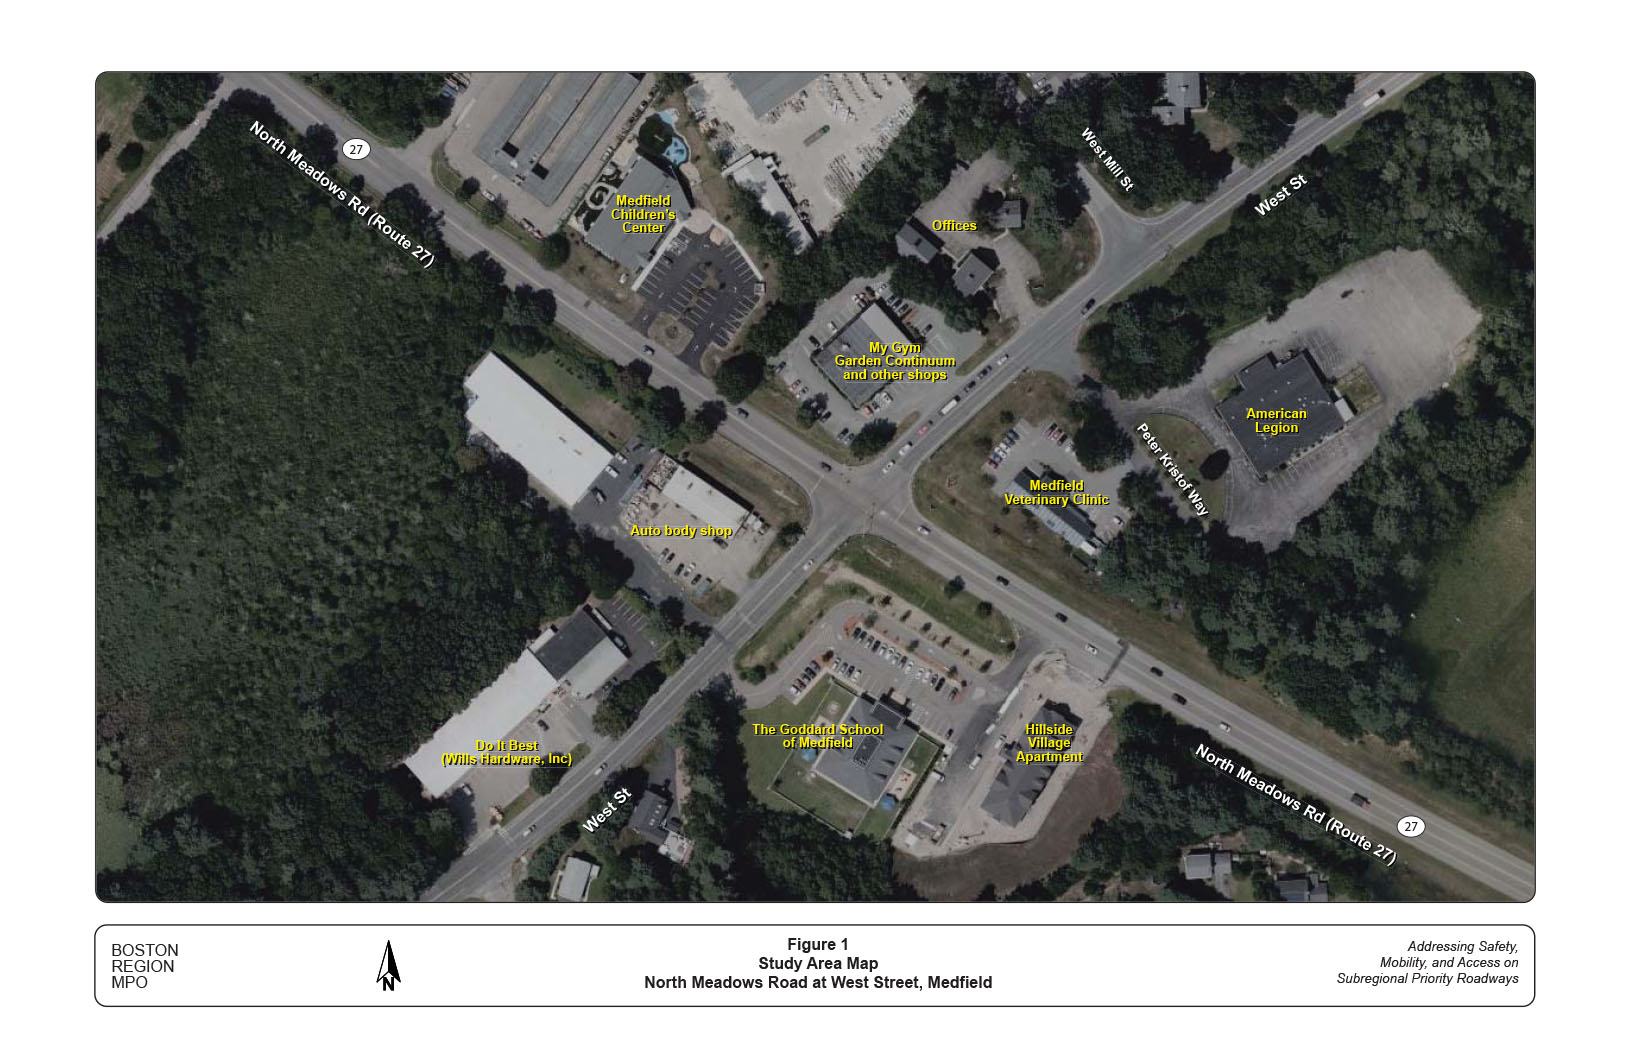 Figure 1: Study Area
This figure shows a map of the study area with satellite imagery that shows the existing intersection layout.
